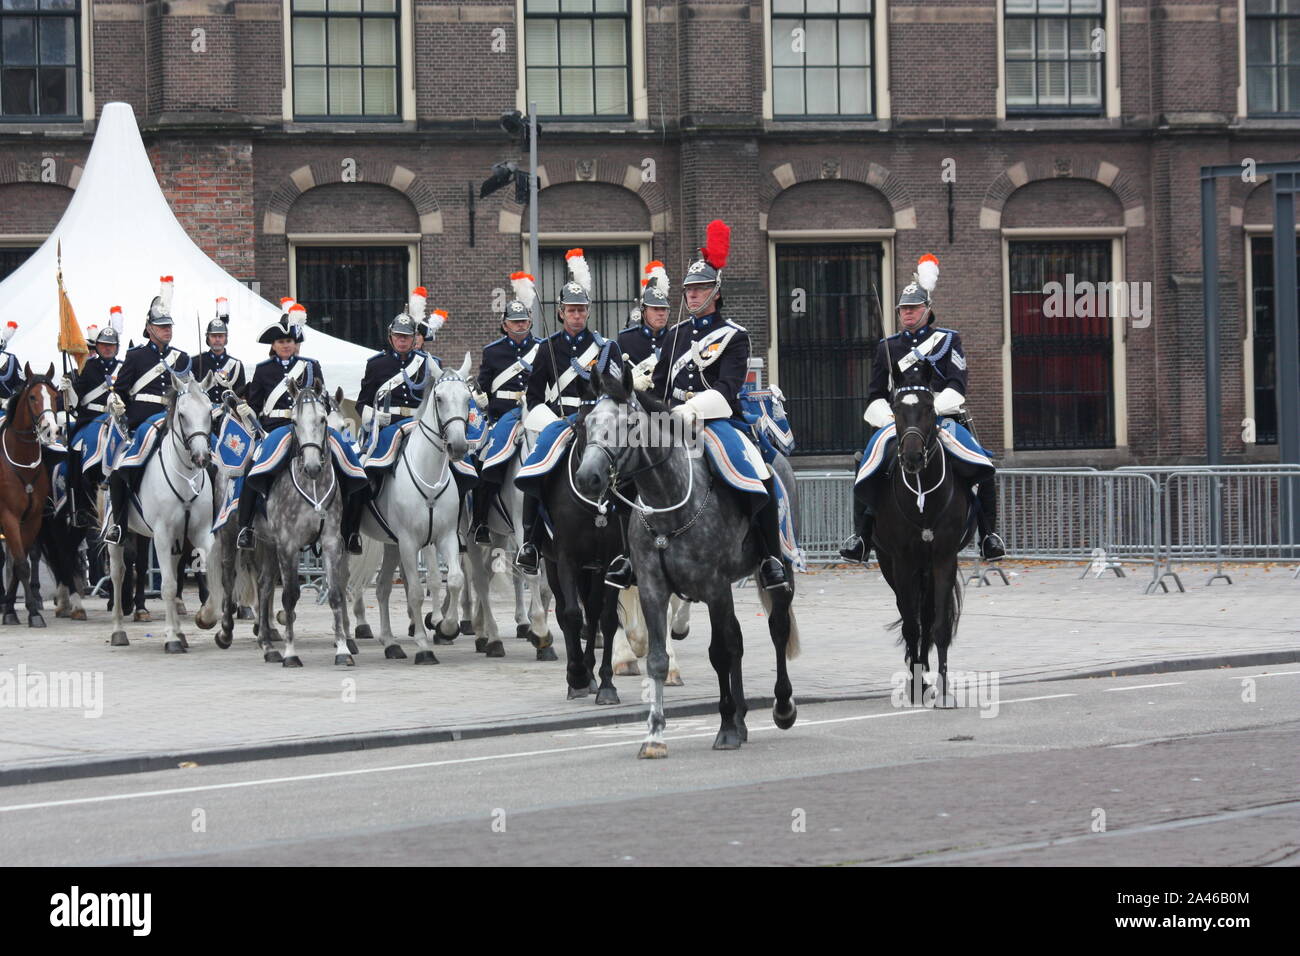 The soldiers on horses left the Binnehof for Noordeinde Palace in The Hague after The Prinsjesdag ceremony. Stock Photo